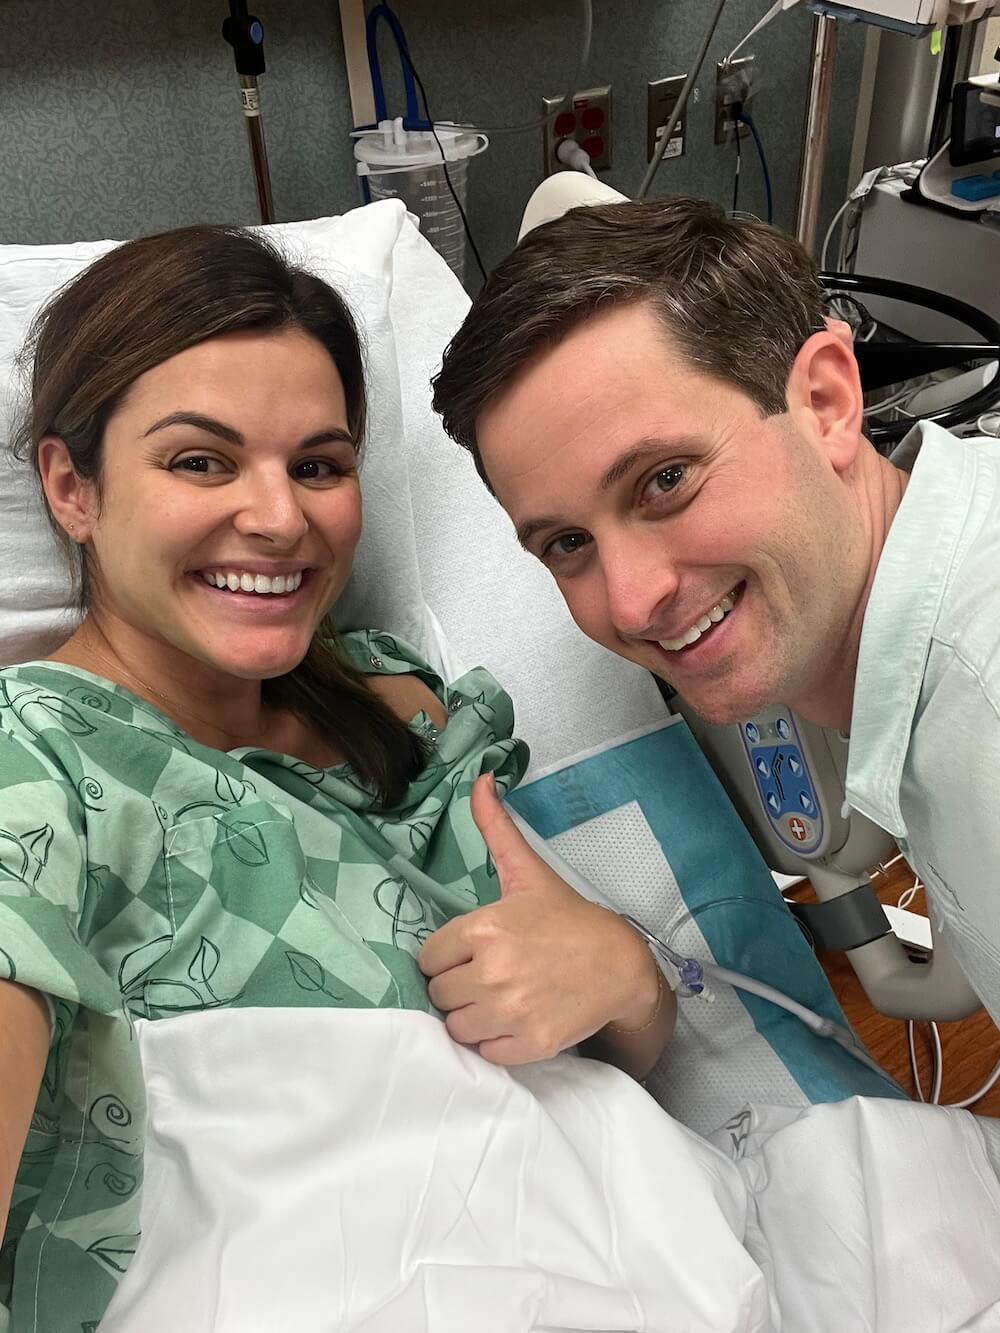 man and woman with brown hair in hospital about to have a new baby